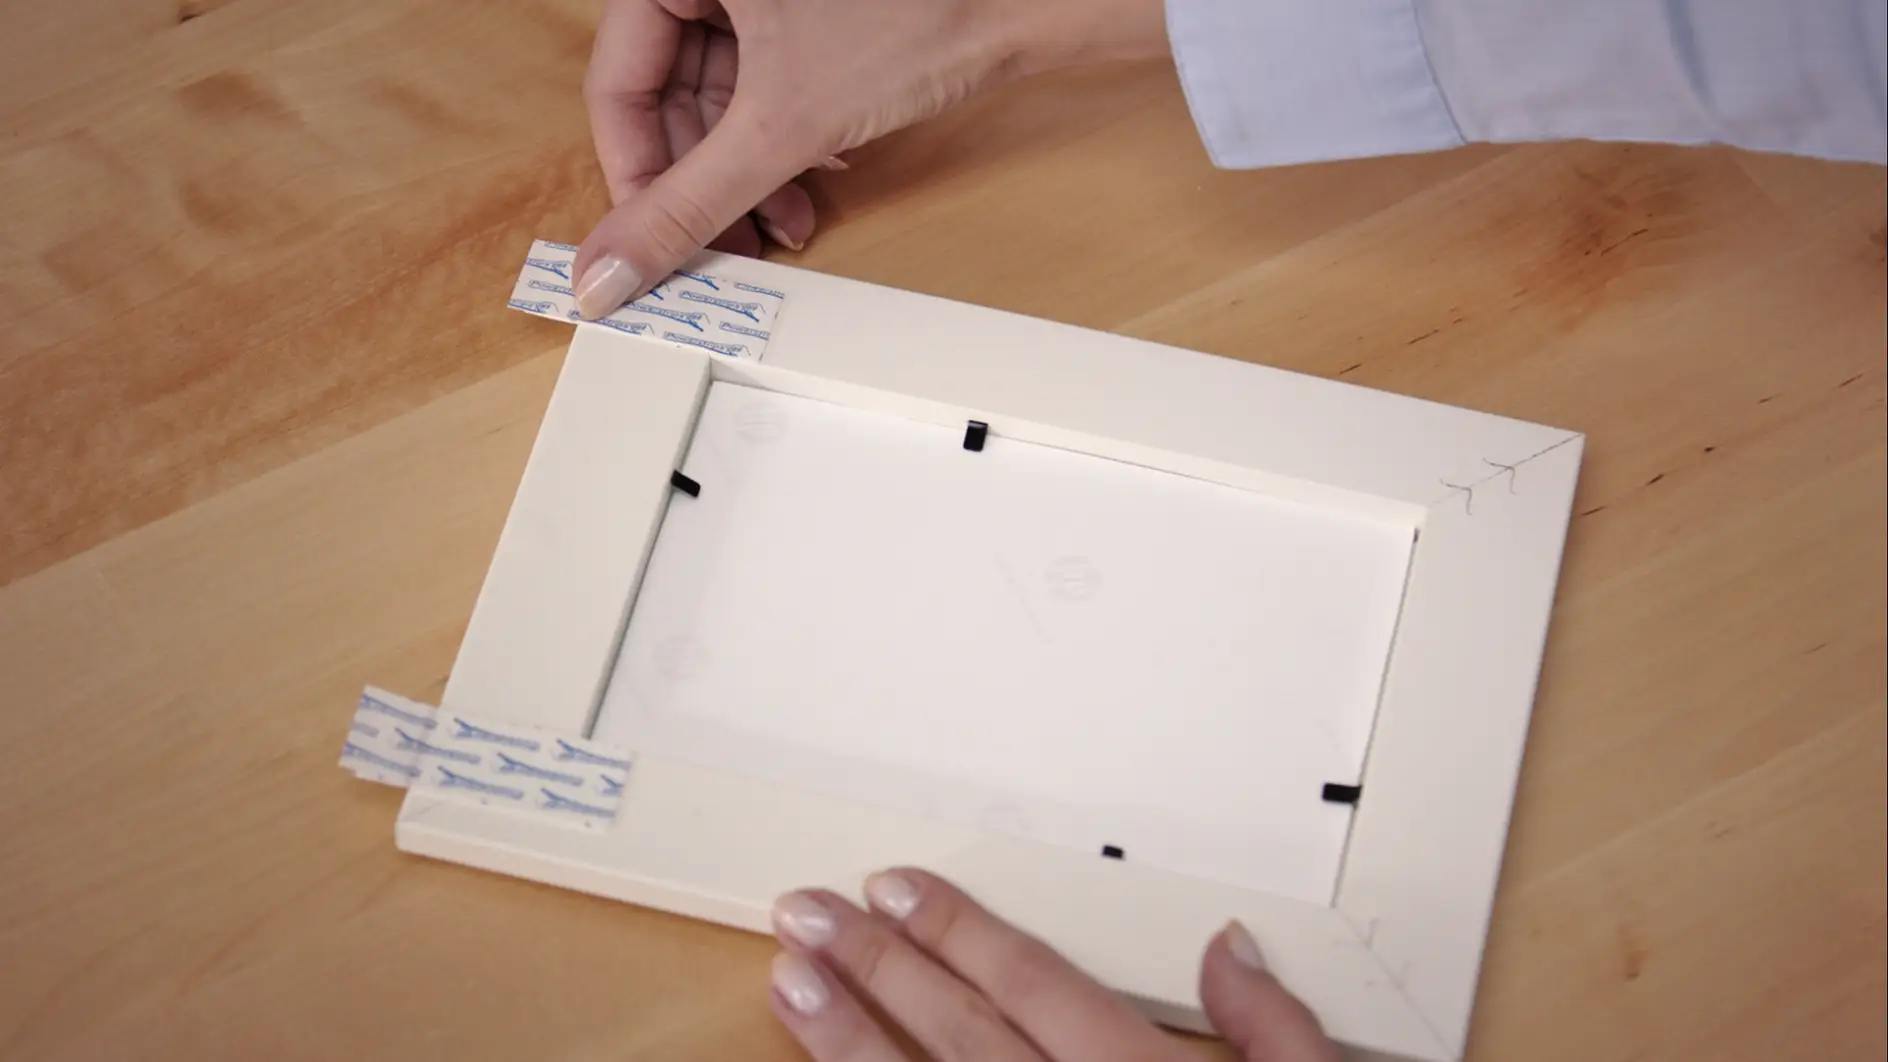 Powerful adhesive strips to directly mount household objects on walls.